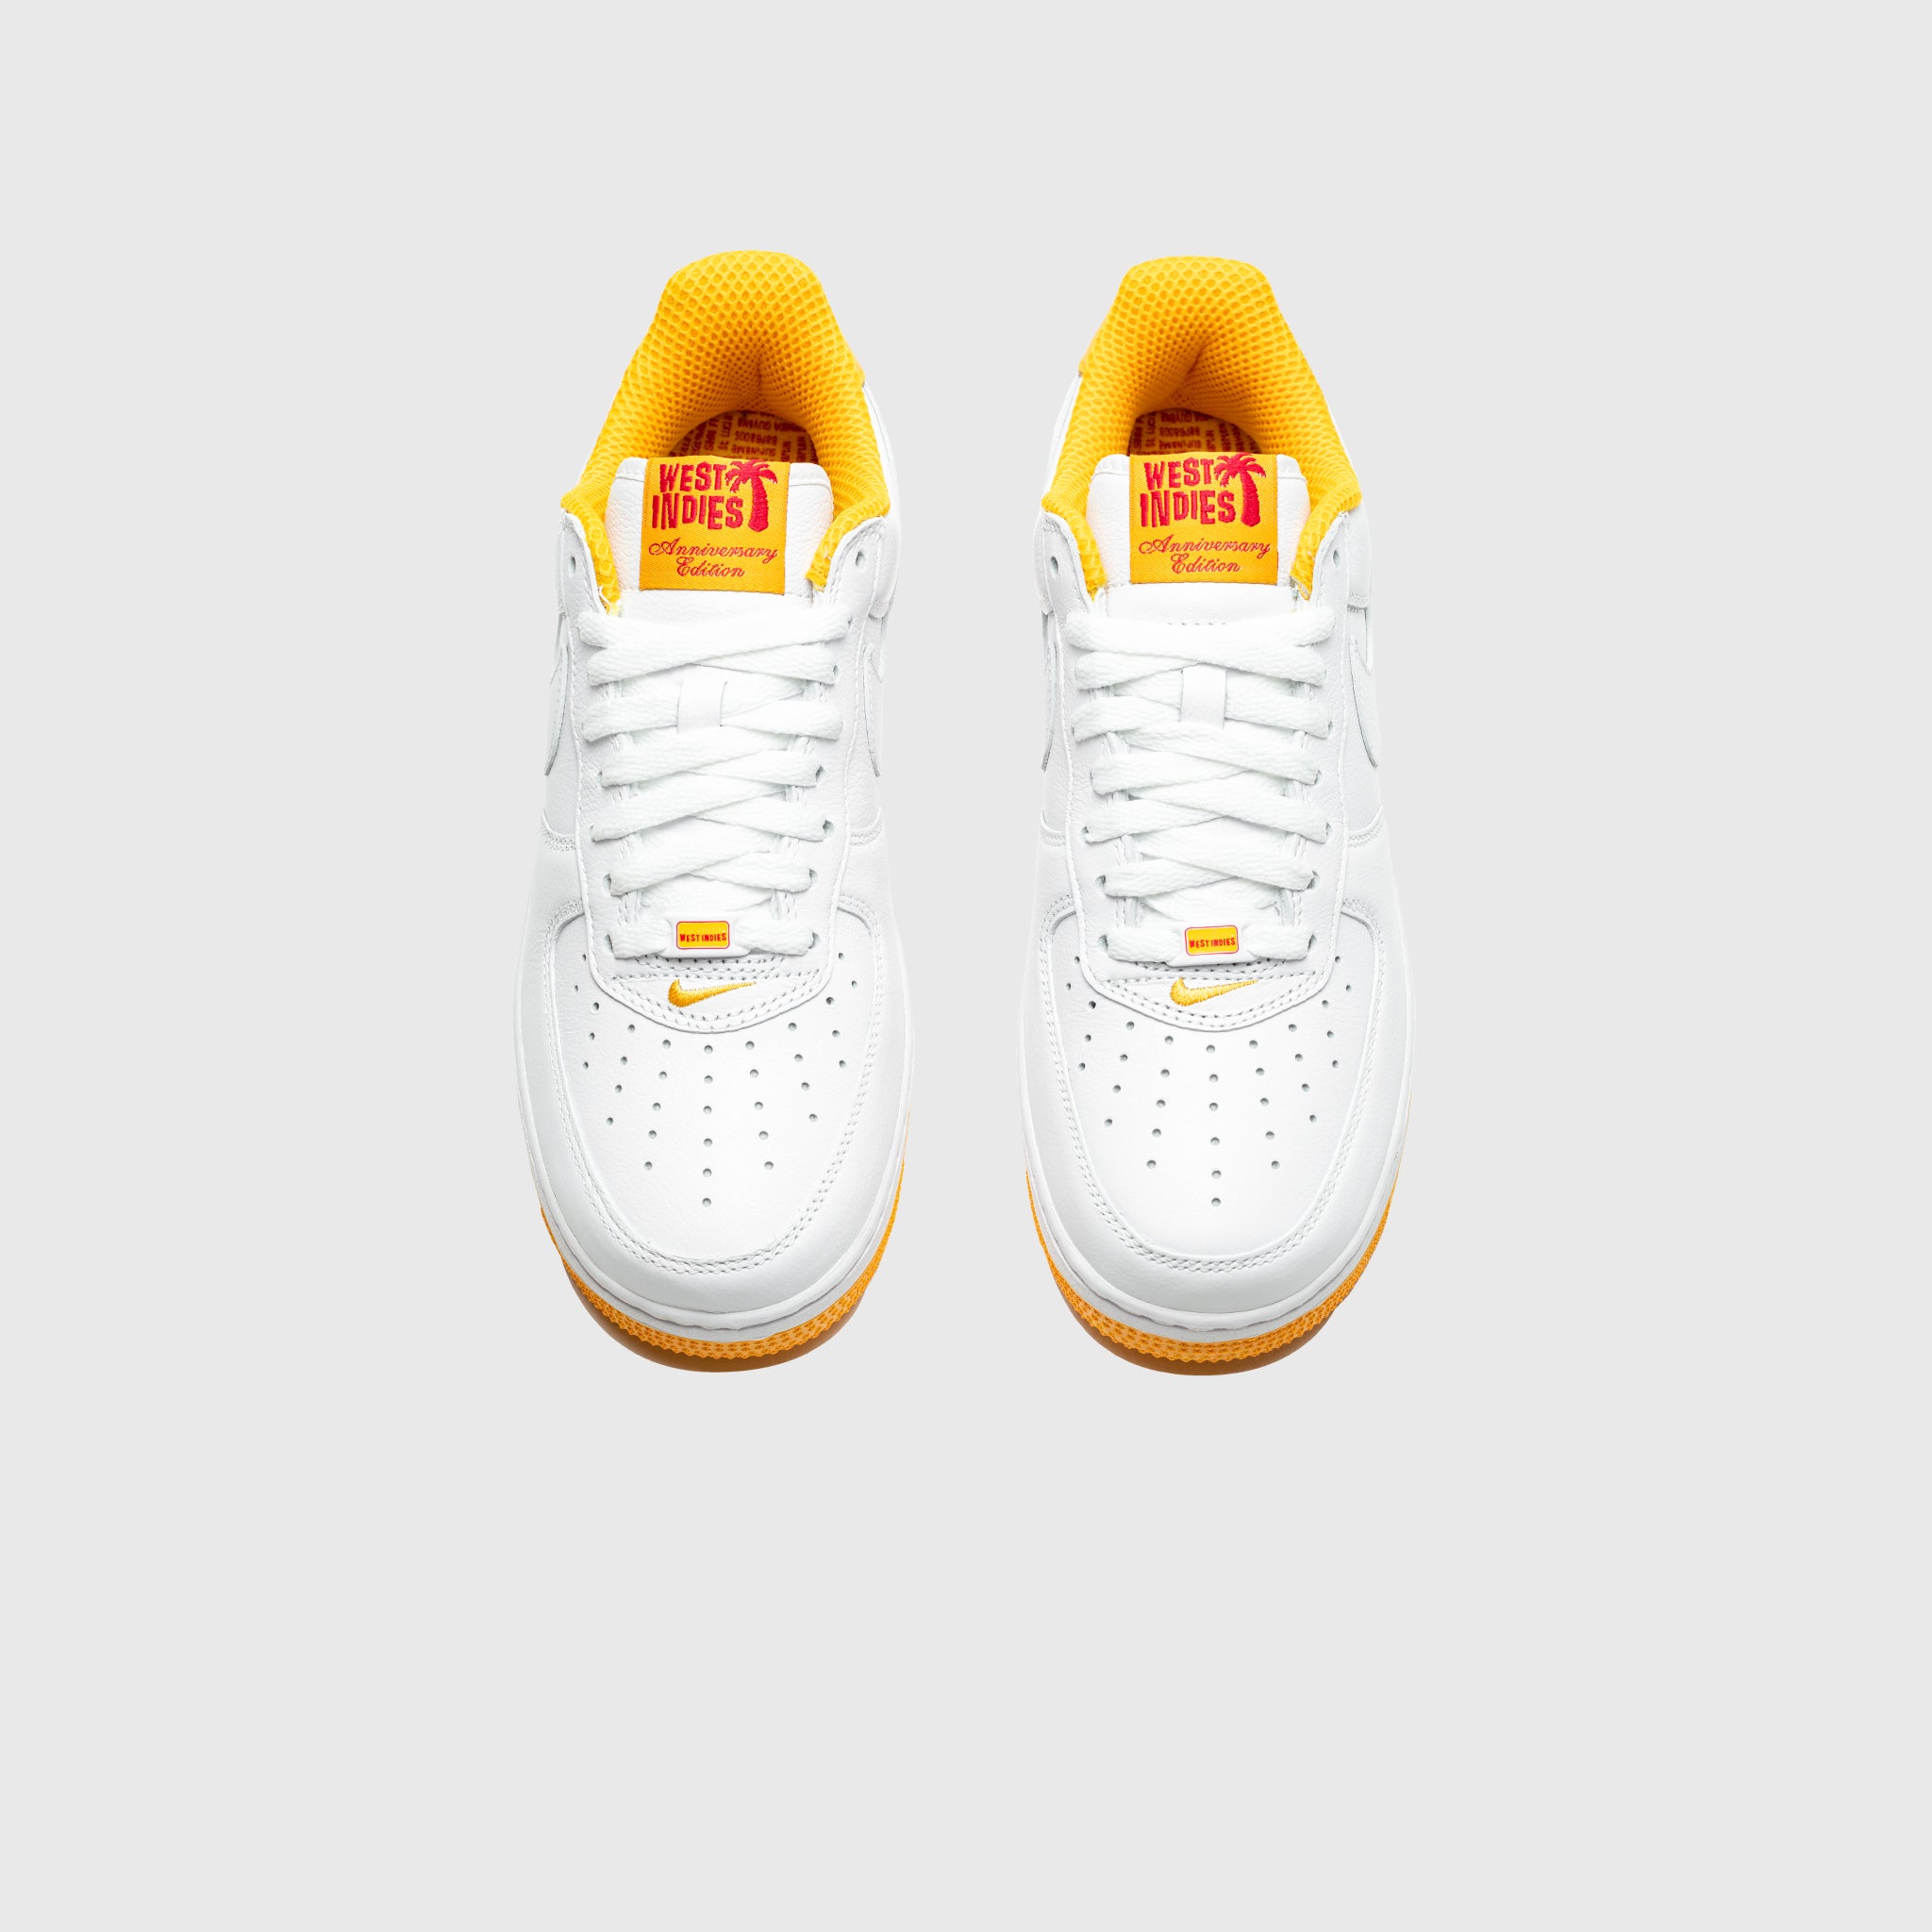 AIR FORCE 1 LOW RETRO SPEED YELLOW – PACKER SHOES